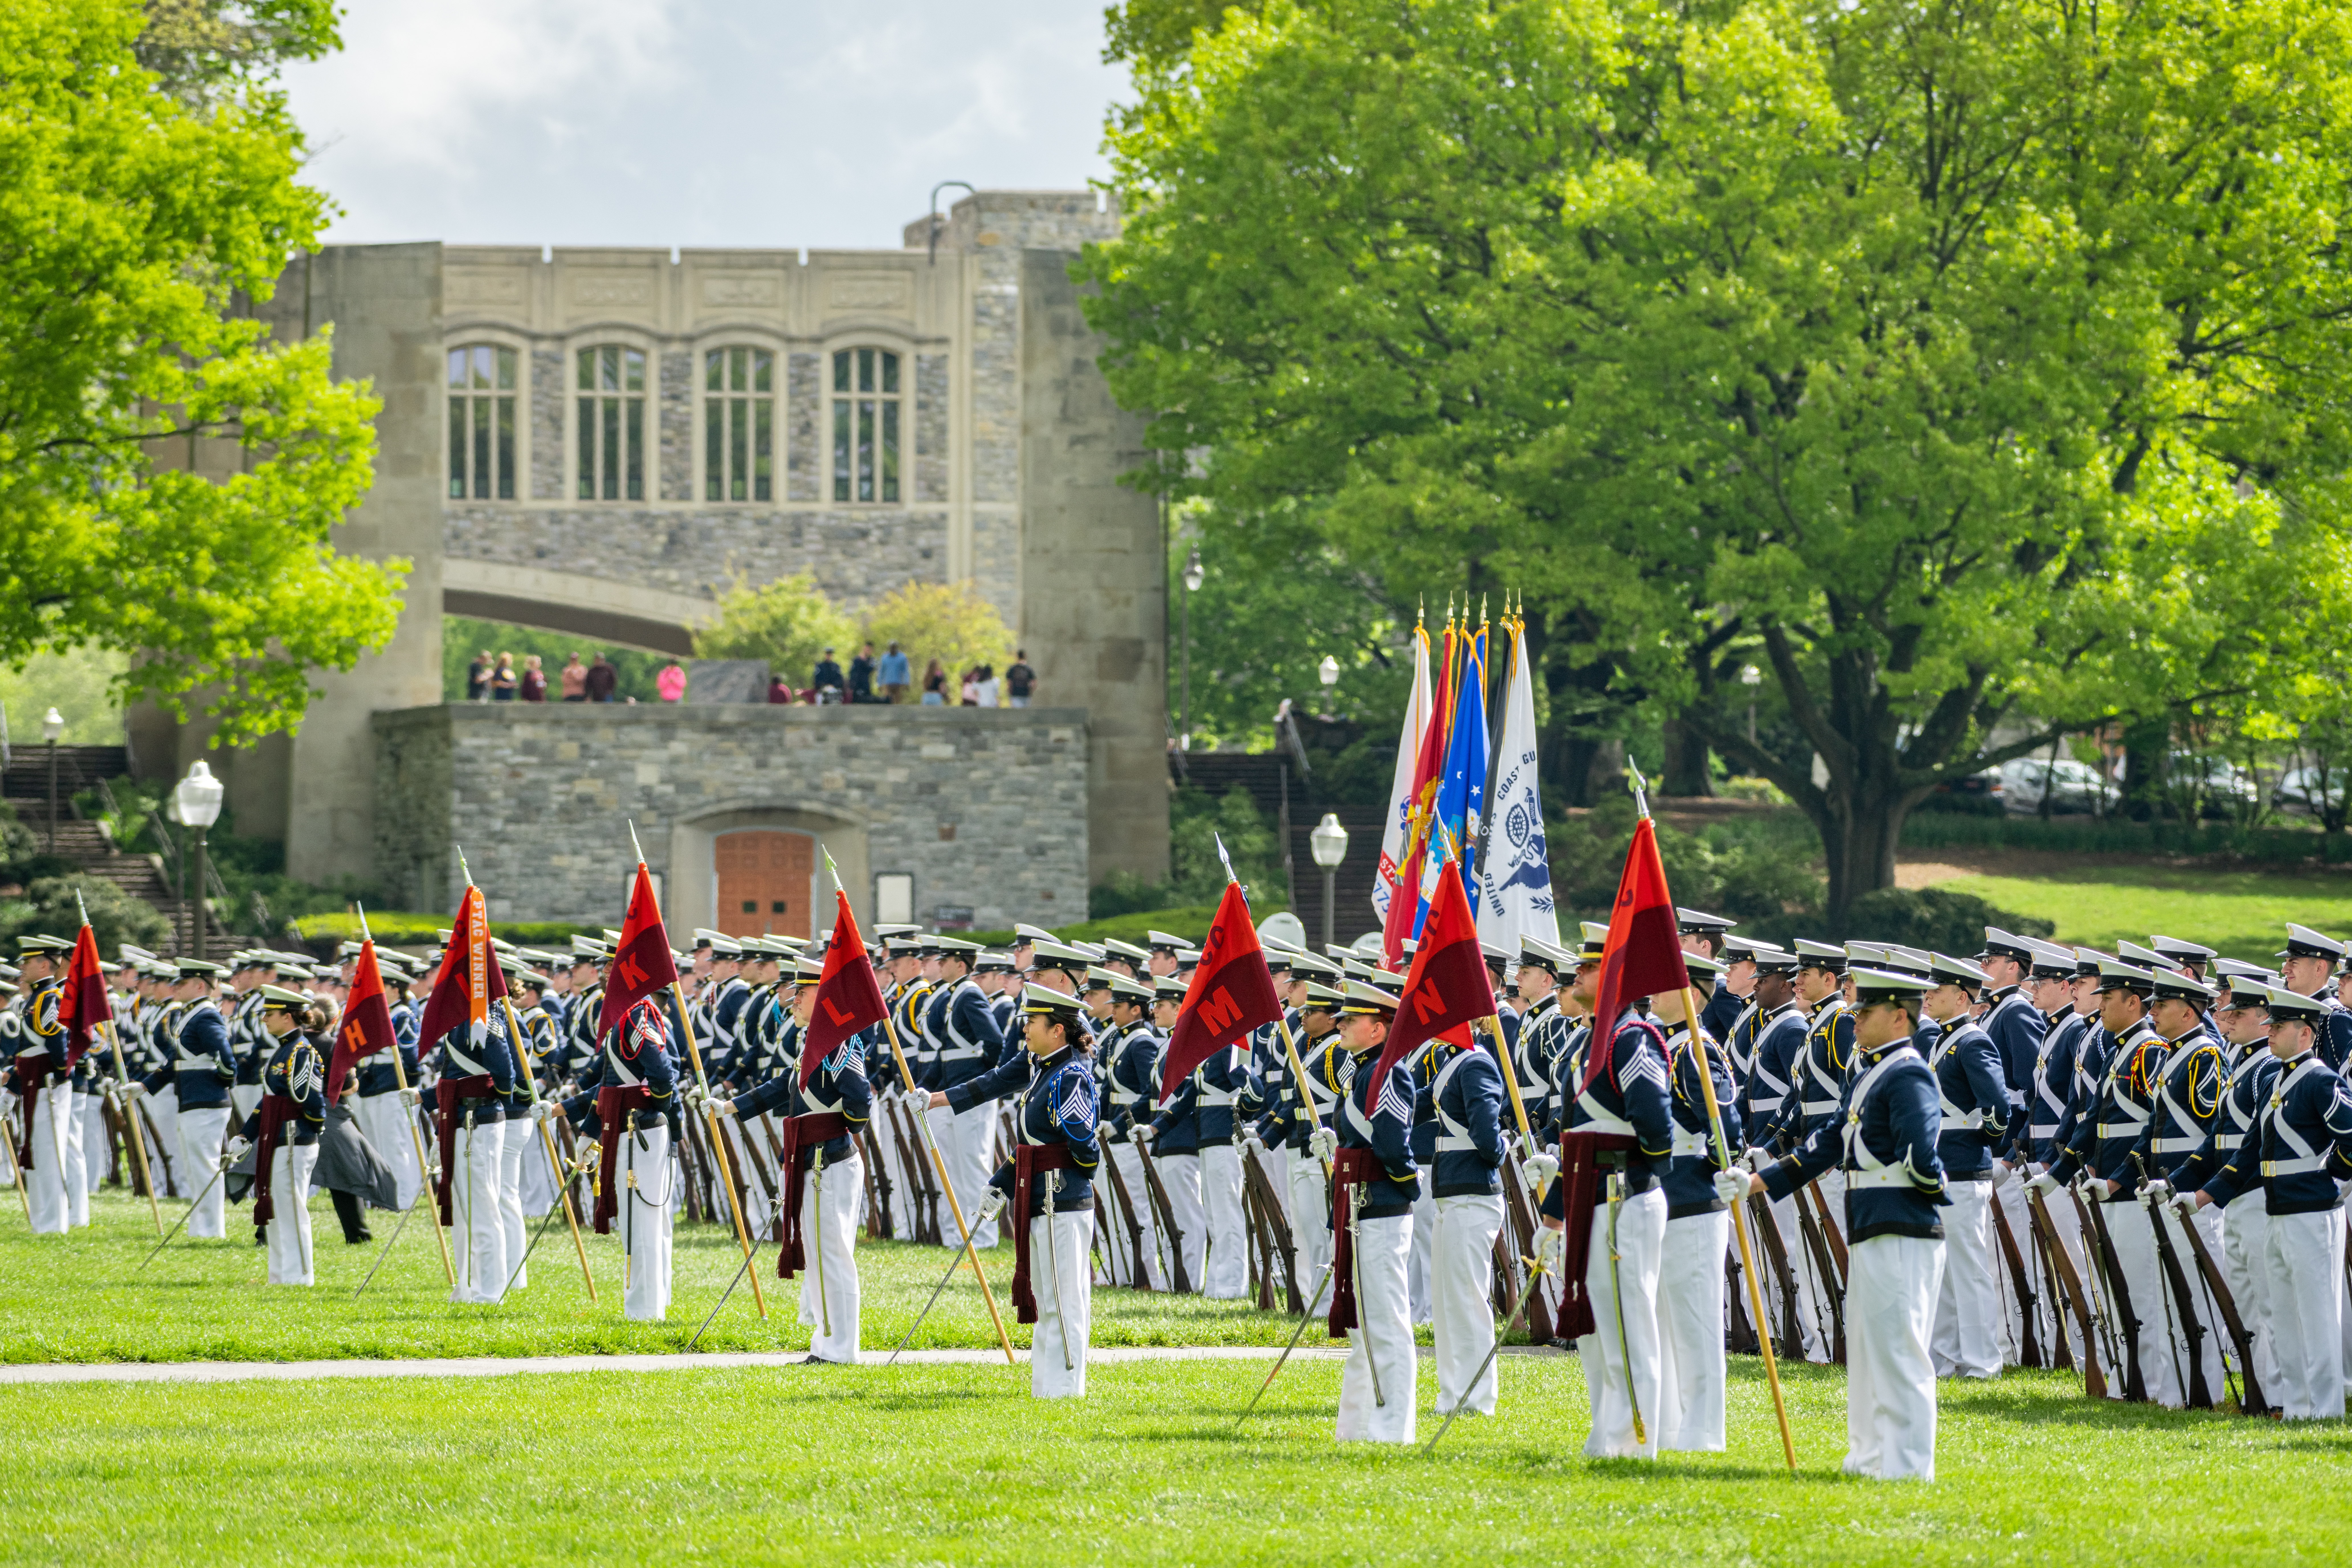 Cadets render honors while marching on the Drillfield.